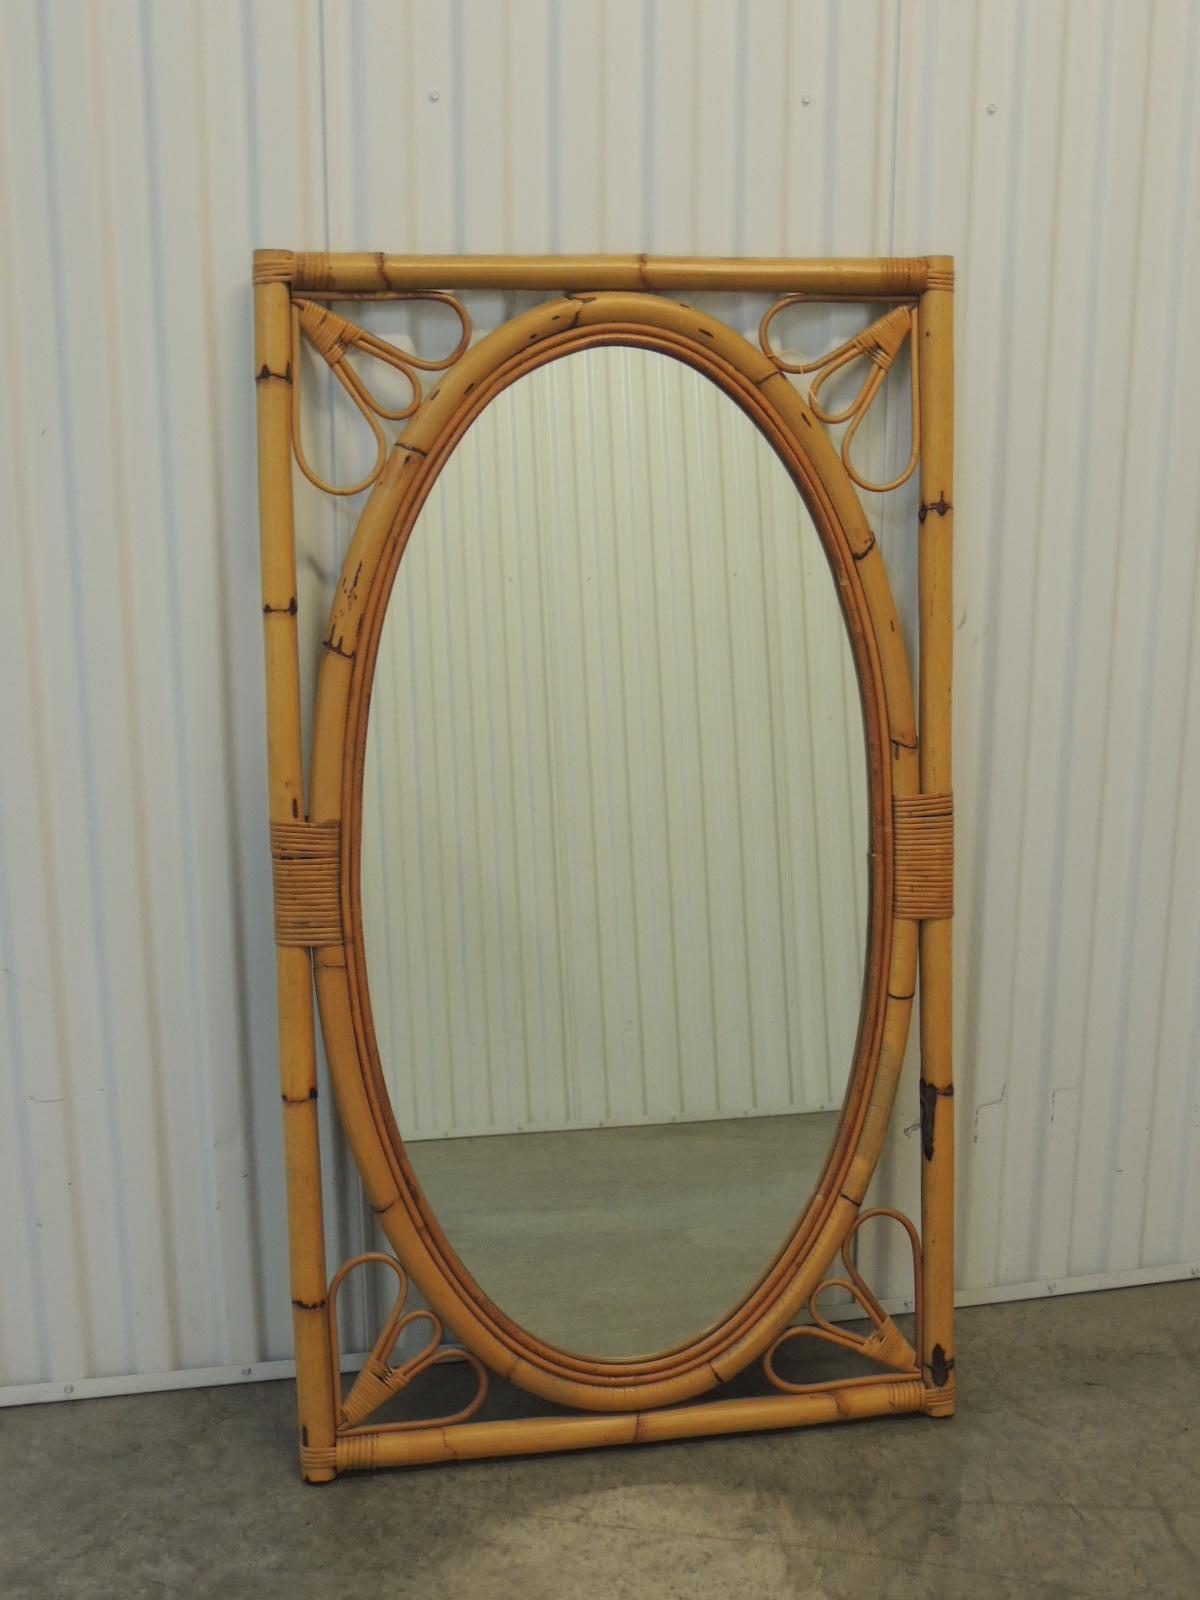 Vintage oval bamboo and rattan mirror on rectangular frame.
Hanging wire in the back.
Size: 24.5